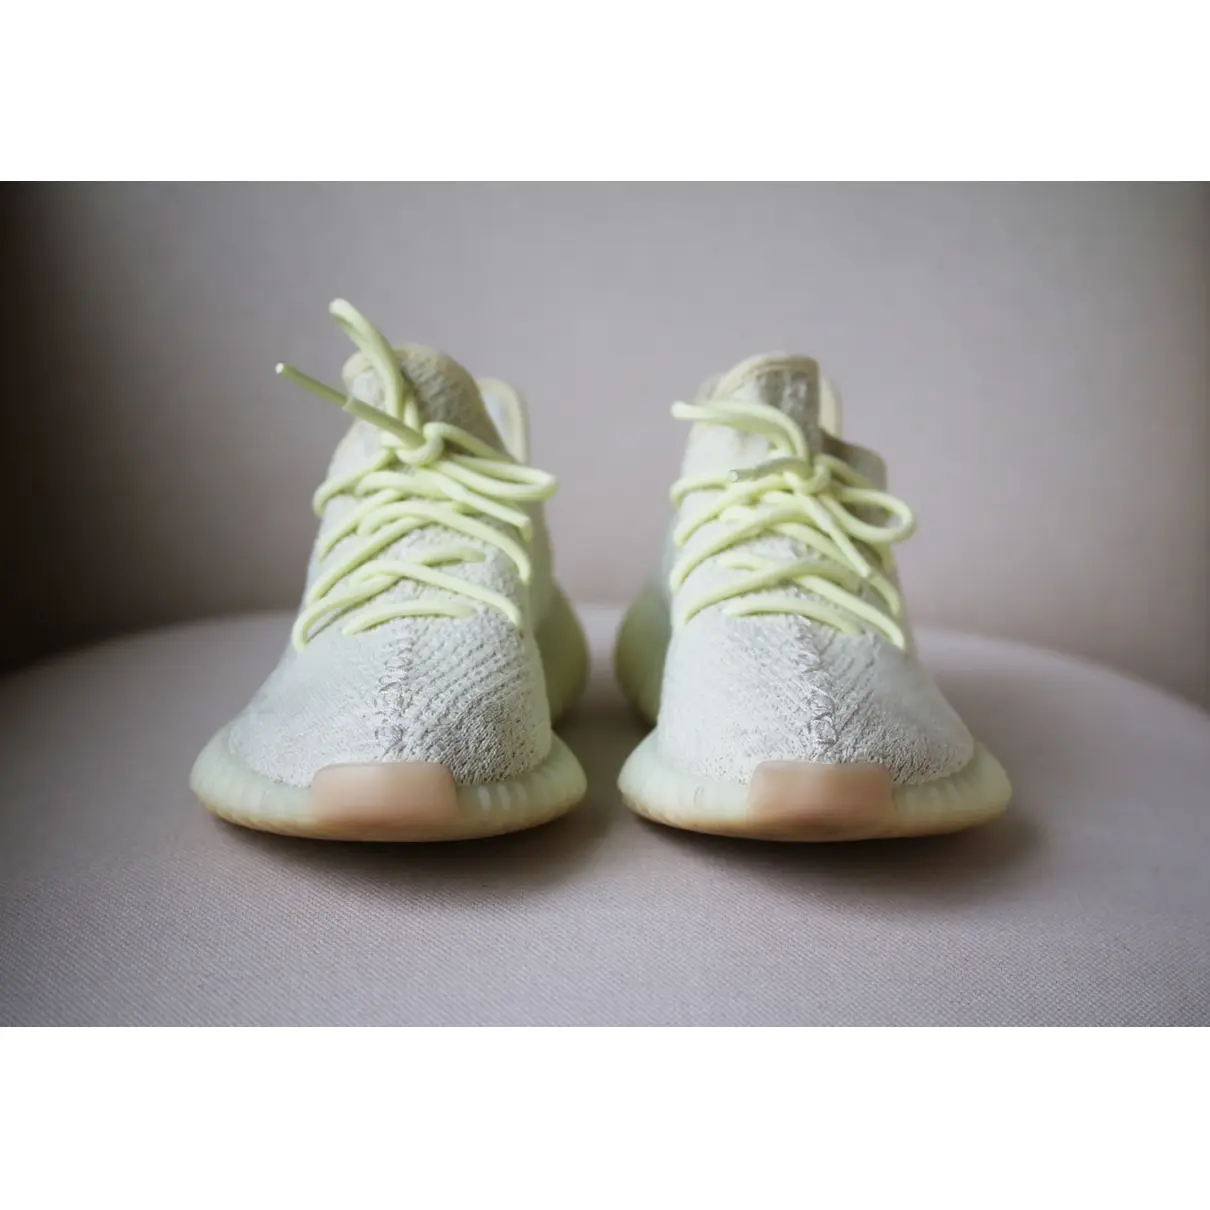 Yeezy x Adidas Boost 350 V2 cloth trainers for sale